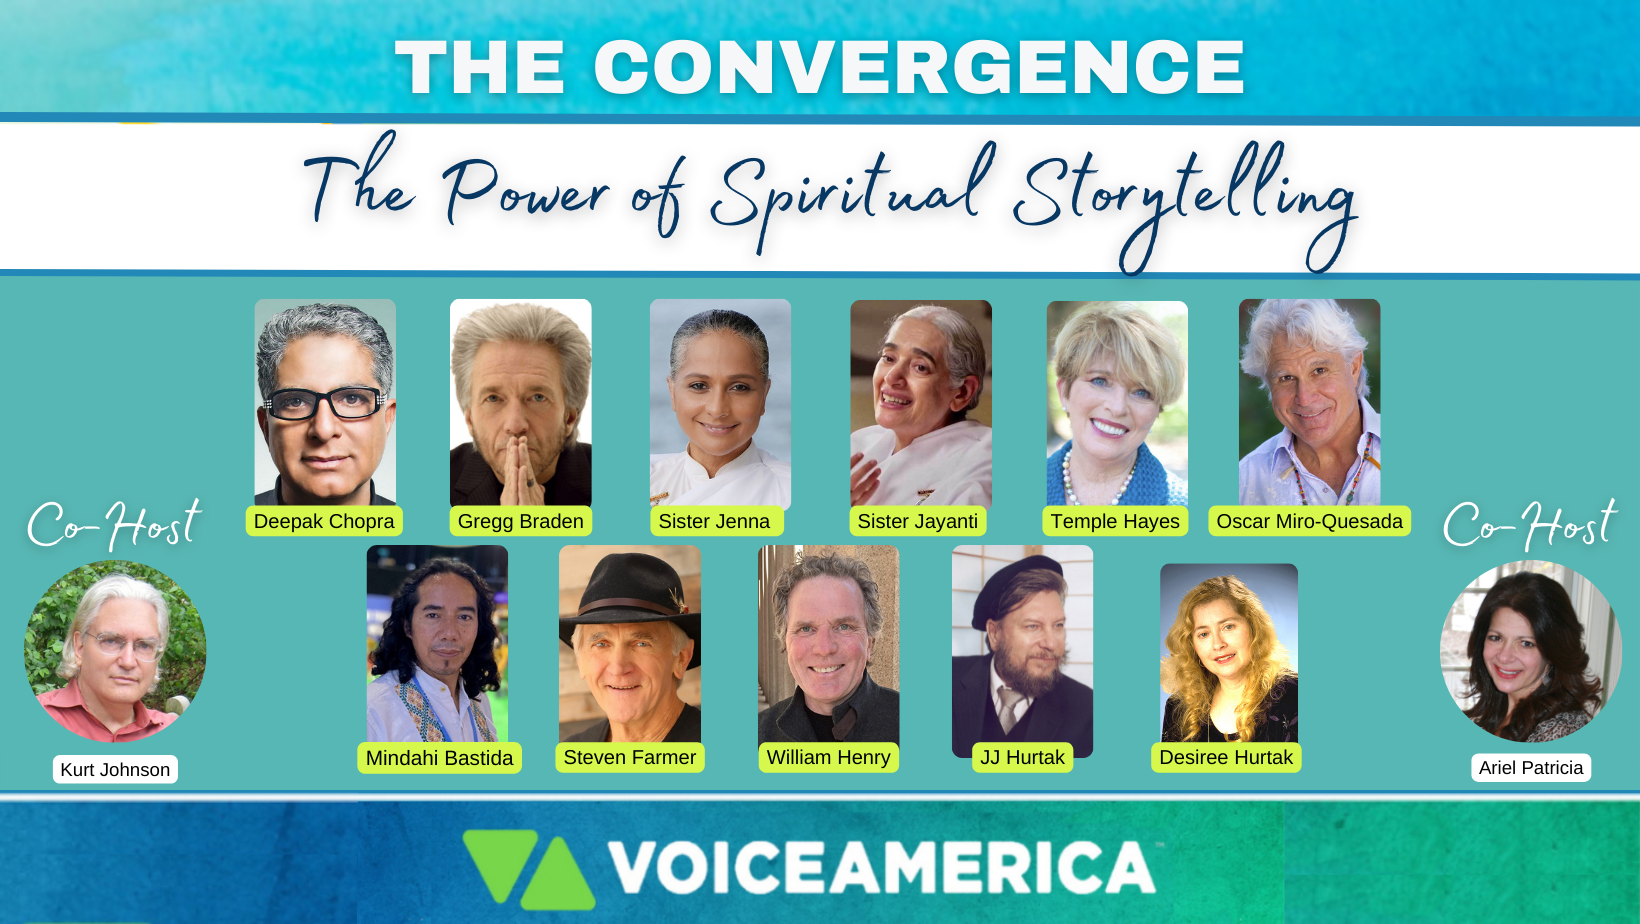 Deepak Chopra, Gregg Braden and other noted authors discuss The Power of Spiritual Story-telling on The Convergence, VoiceAmerica